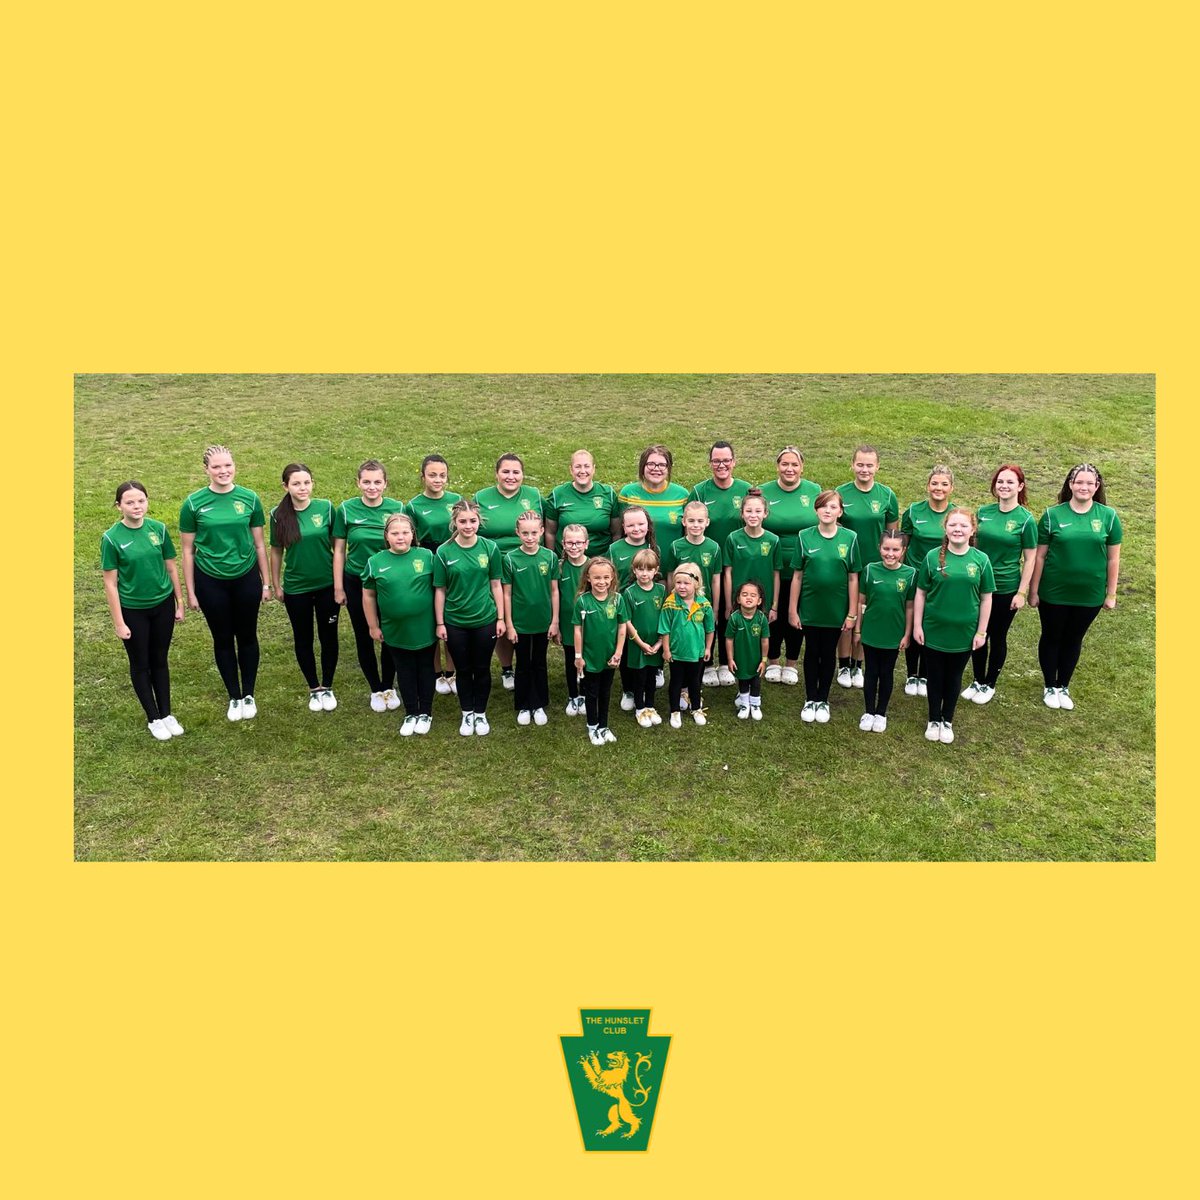 💚The Hunslet Club Solitaires, our award winning Majorettes Troupe are recruiting for next season! They compete Military Freestyle routines around the North West of England & have won numerous awards. Check out the timetable & come & give it a try! hunsletclub.org.uk/.../hunslet-cl…